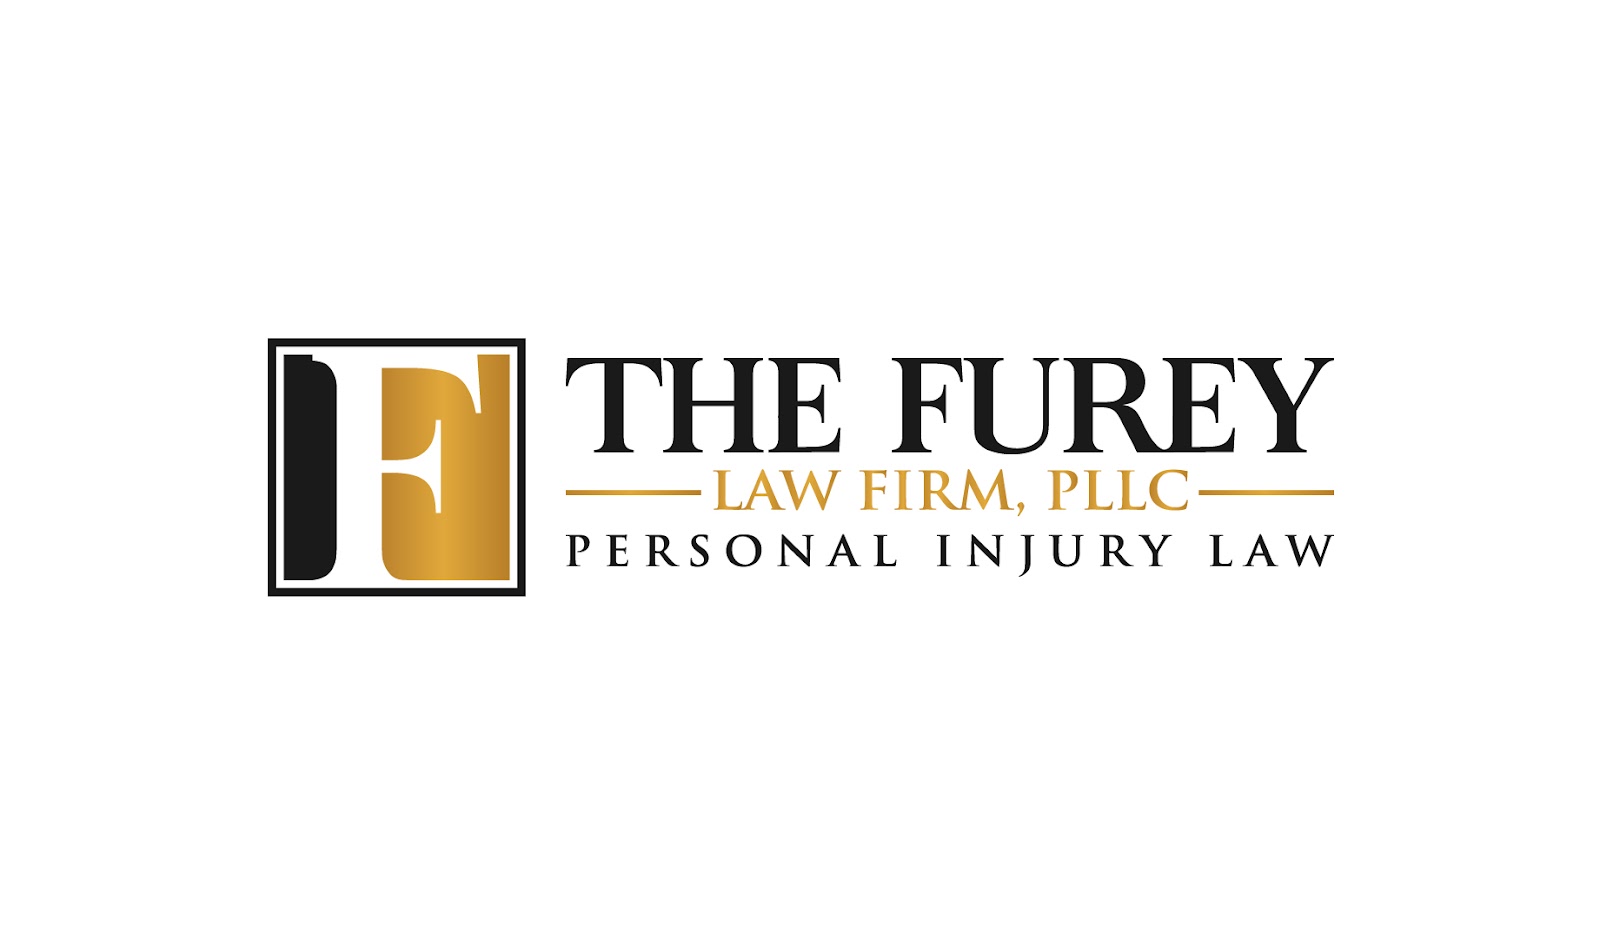 The Furey Law Firm